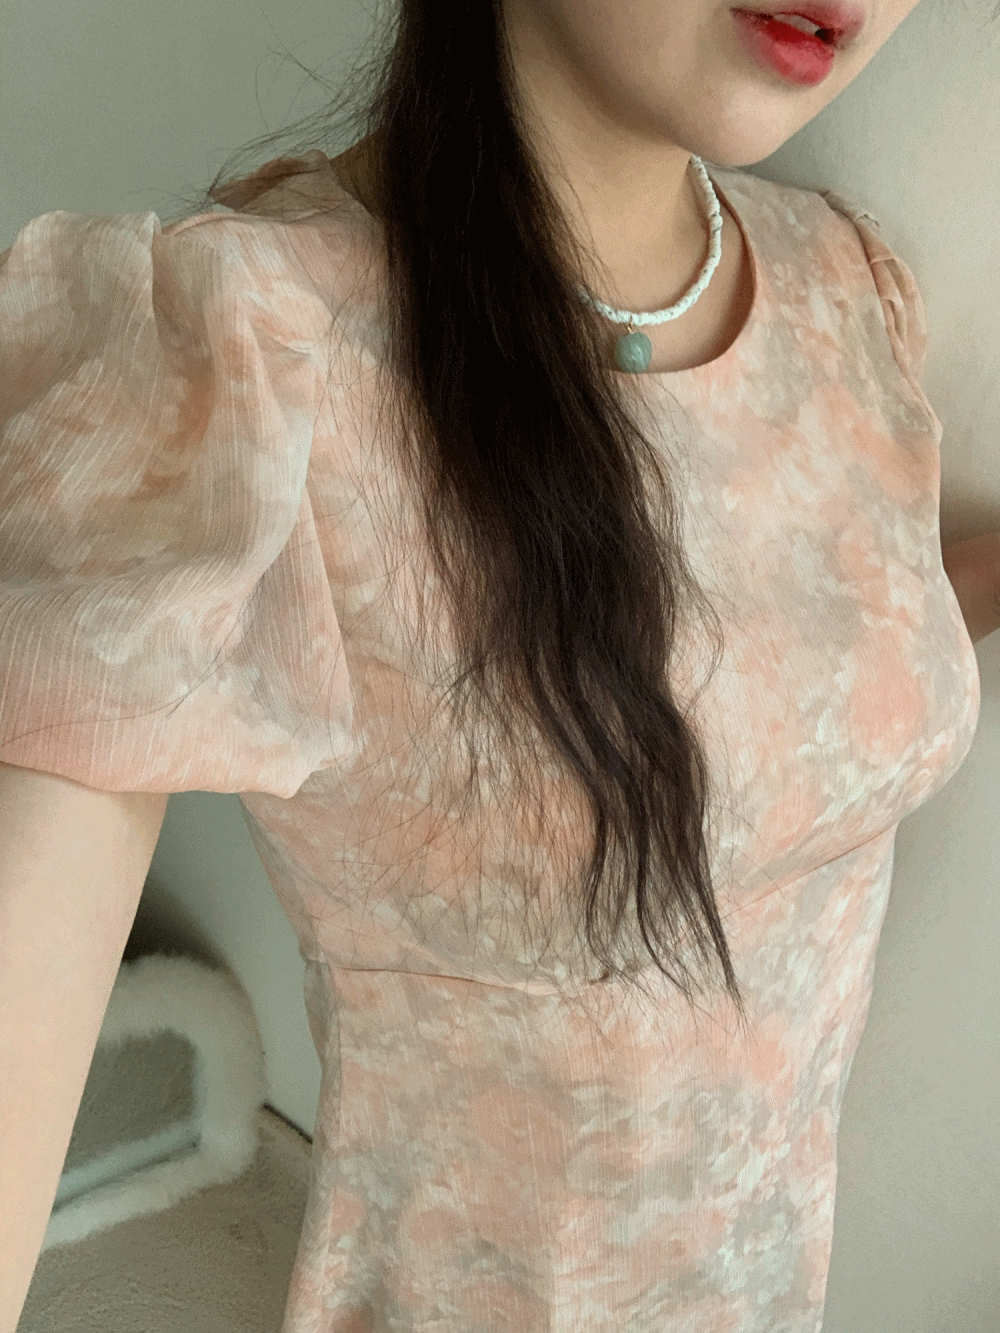 [Dress] Blooming peach dress / one color